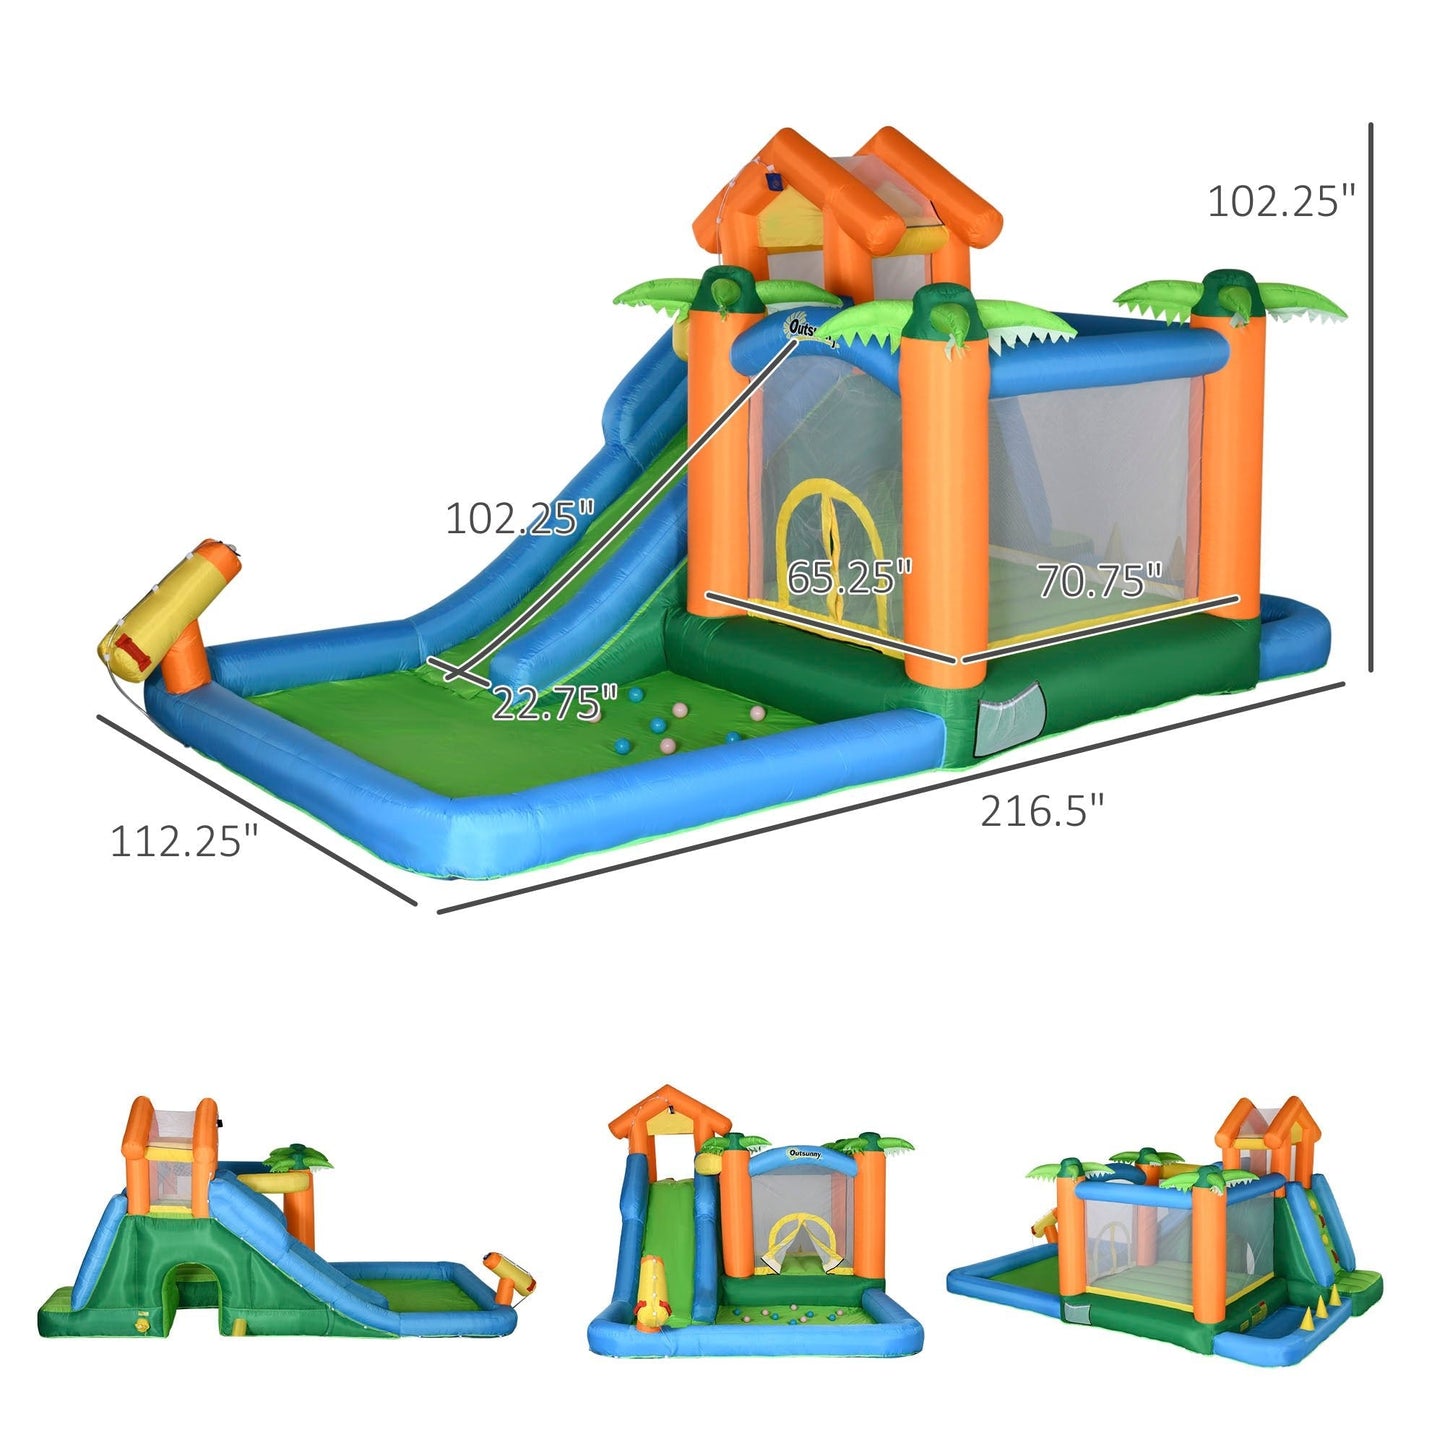 Large Bounce House w/ Inflatable Water Slide, Summer Theme Jumping Castle w/ Trampoline, Water Pool, Climbing Wall, 450W Air Blower for Kids Age 3-8 at Gallery Canada